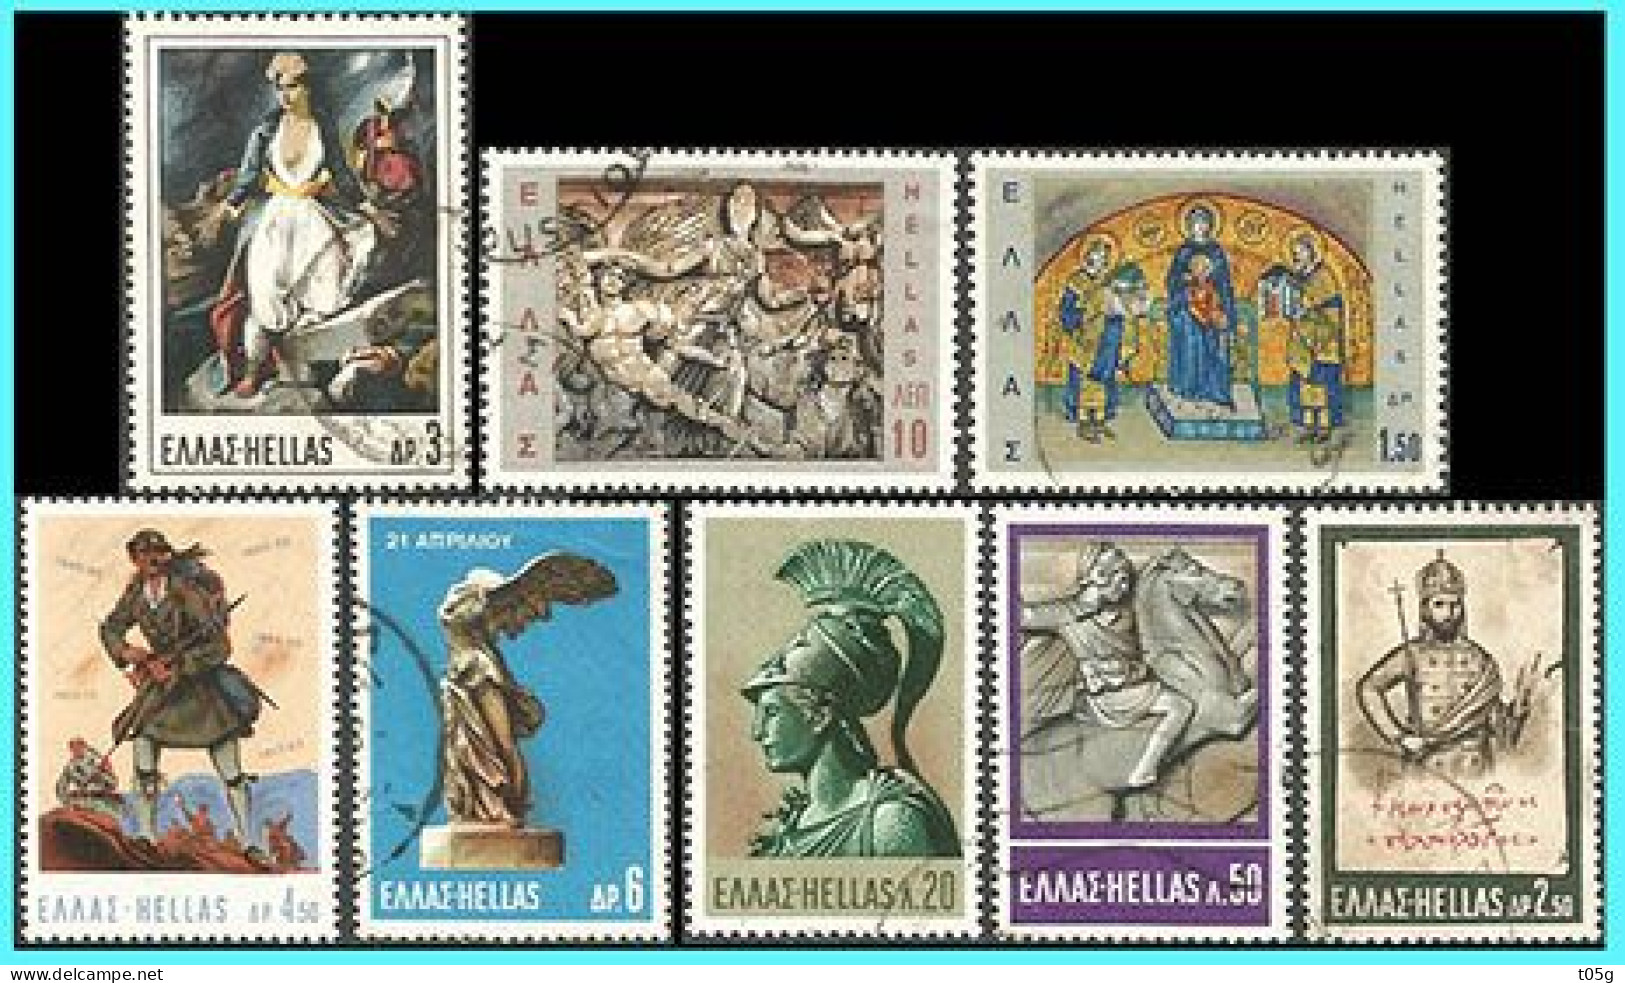 GREECE- GRECE - HELLAS 1968: Compl Set Used - Used Stamps